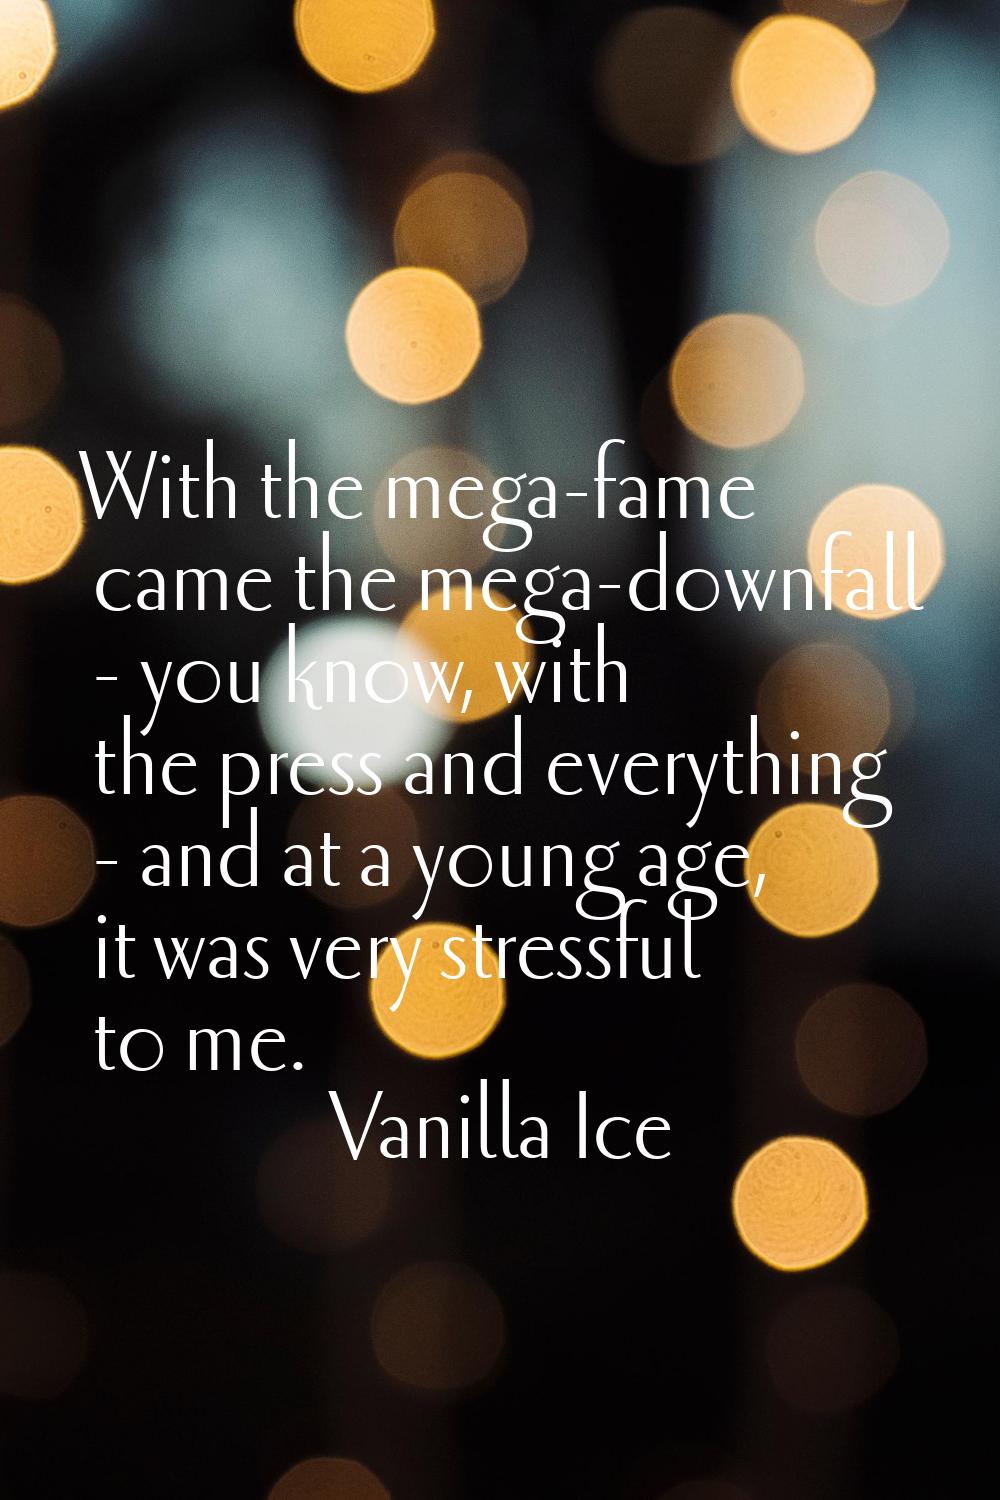 With the mega-fame came the mega-downfall - you know, with the press and everything - and at a youn